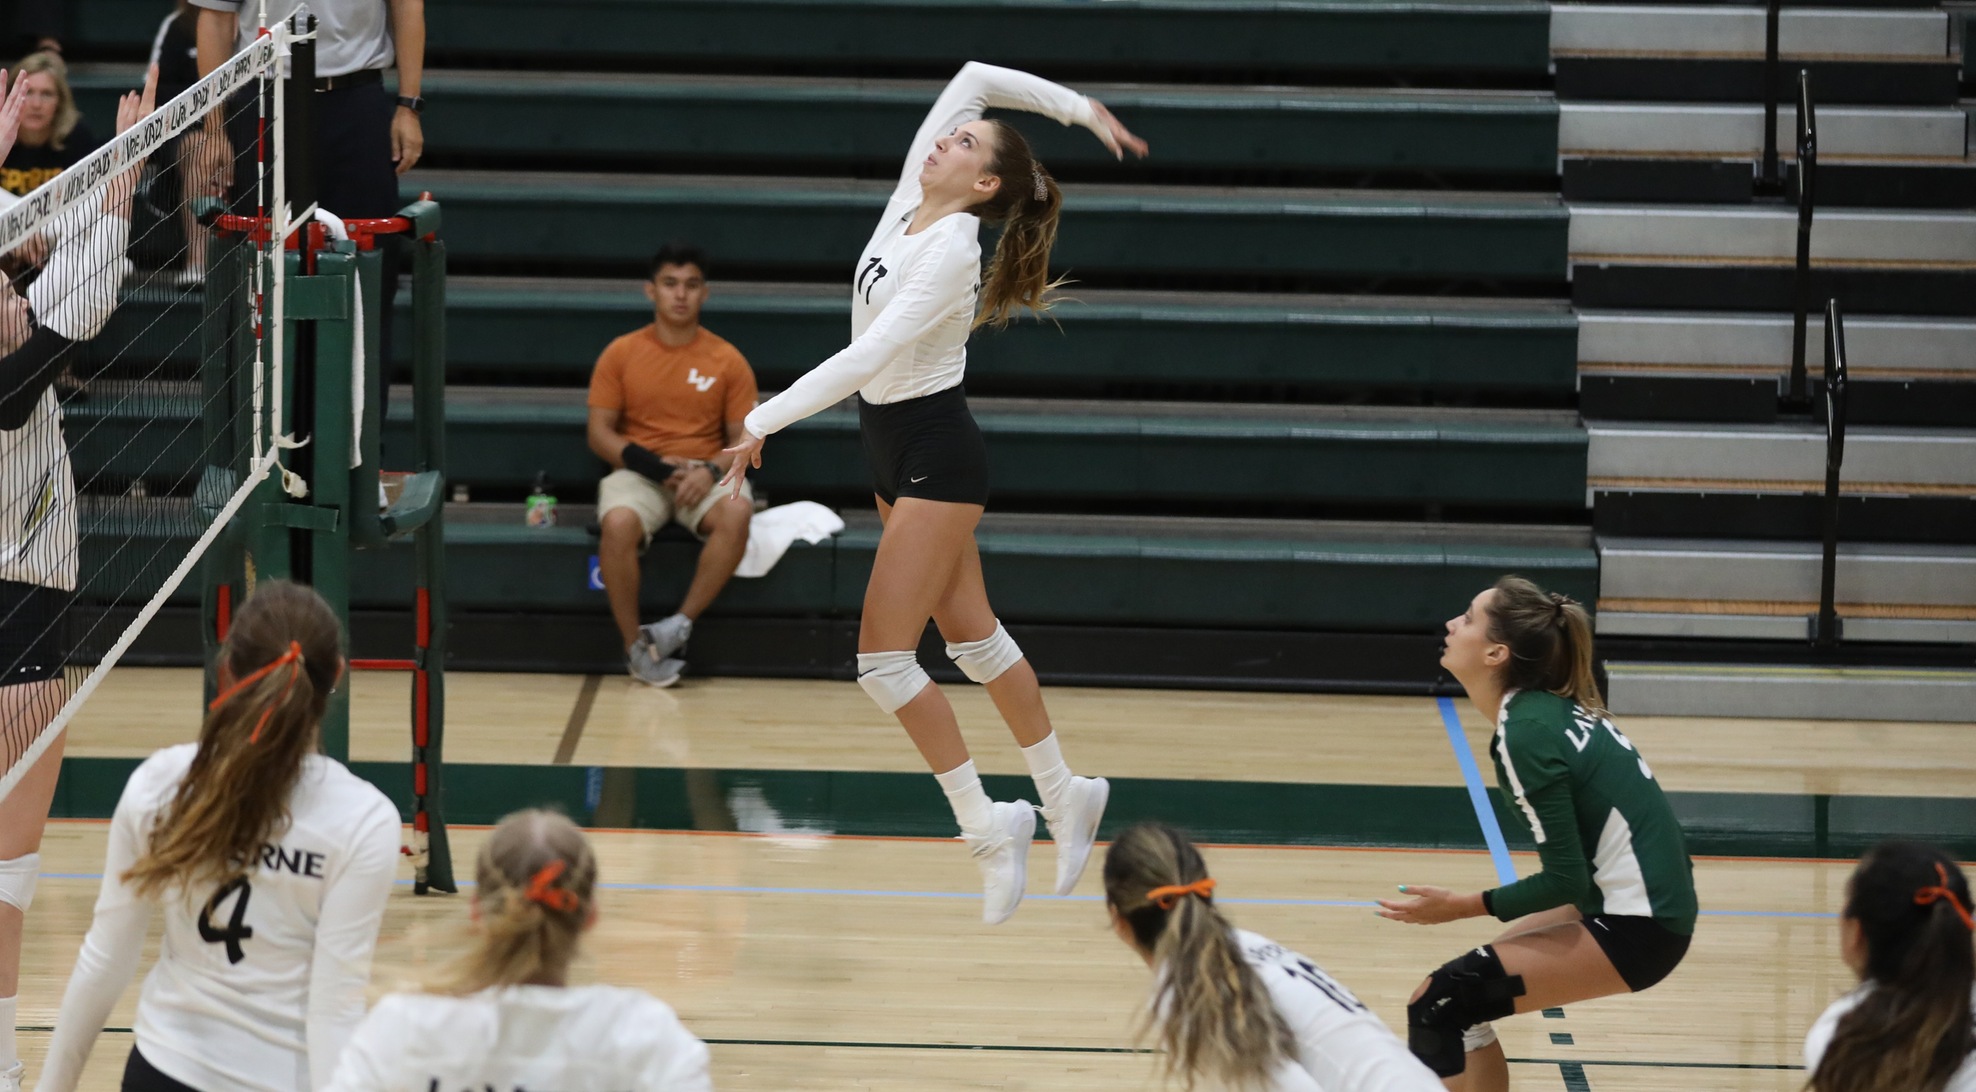 Volleyball wins 5th Straight, Sweeps Redlands